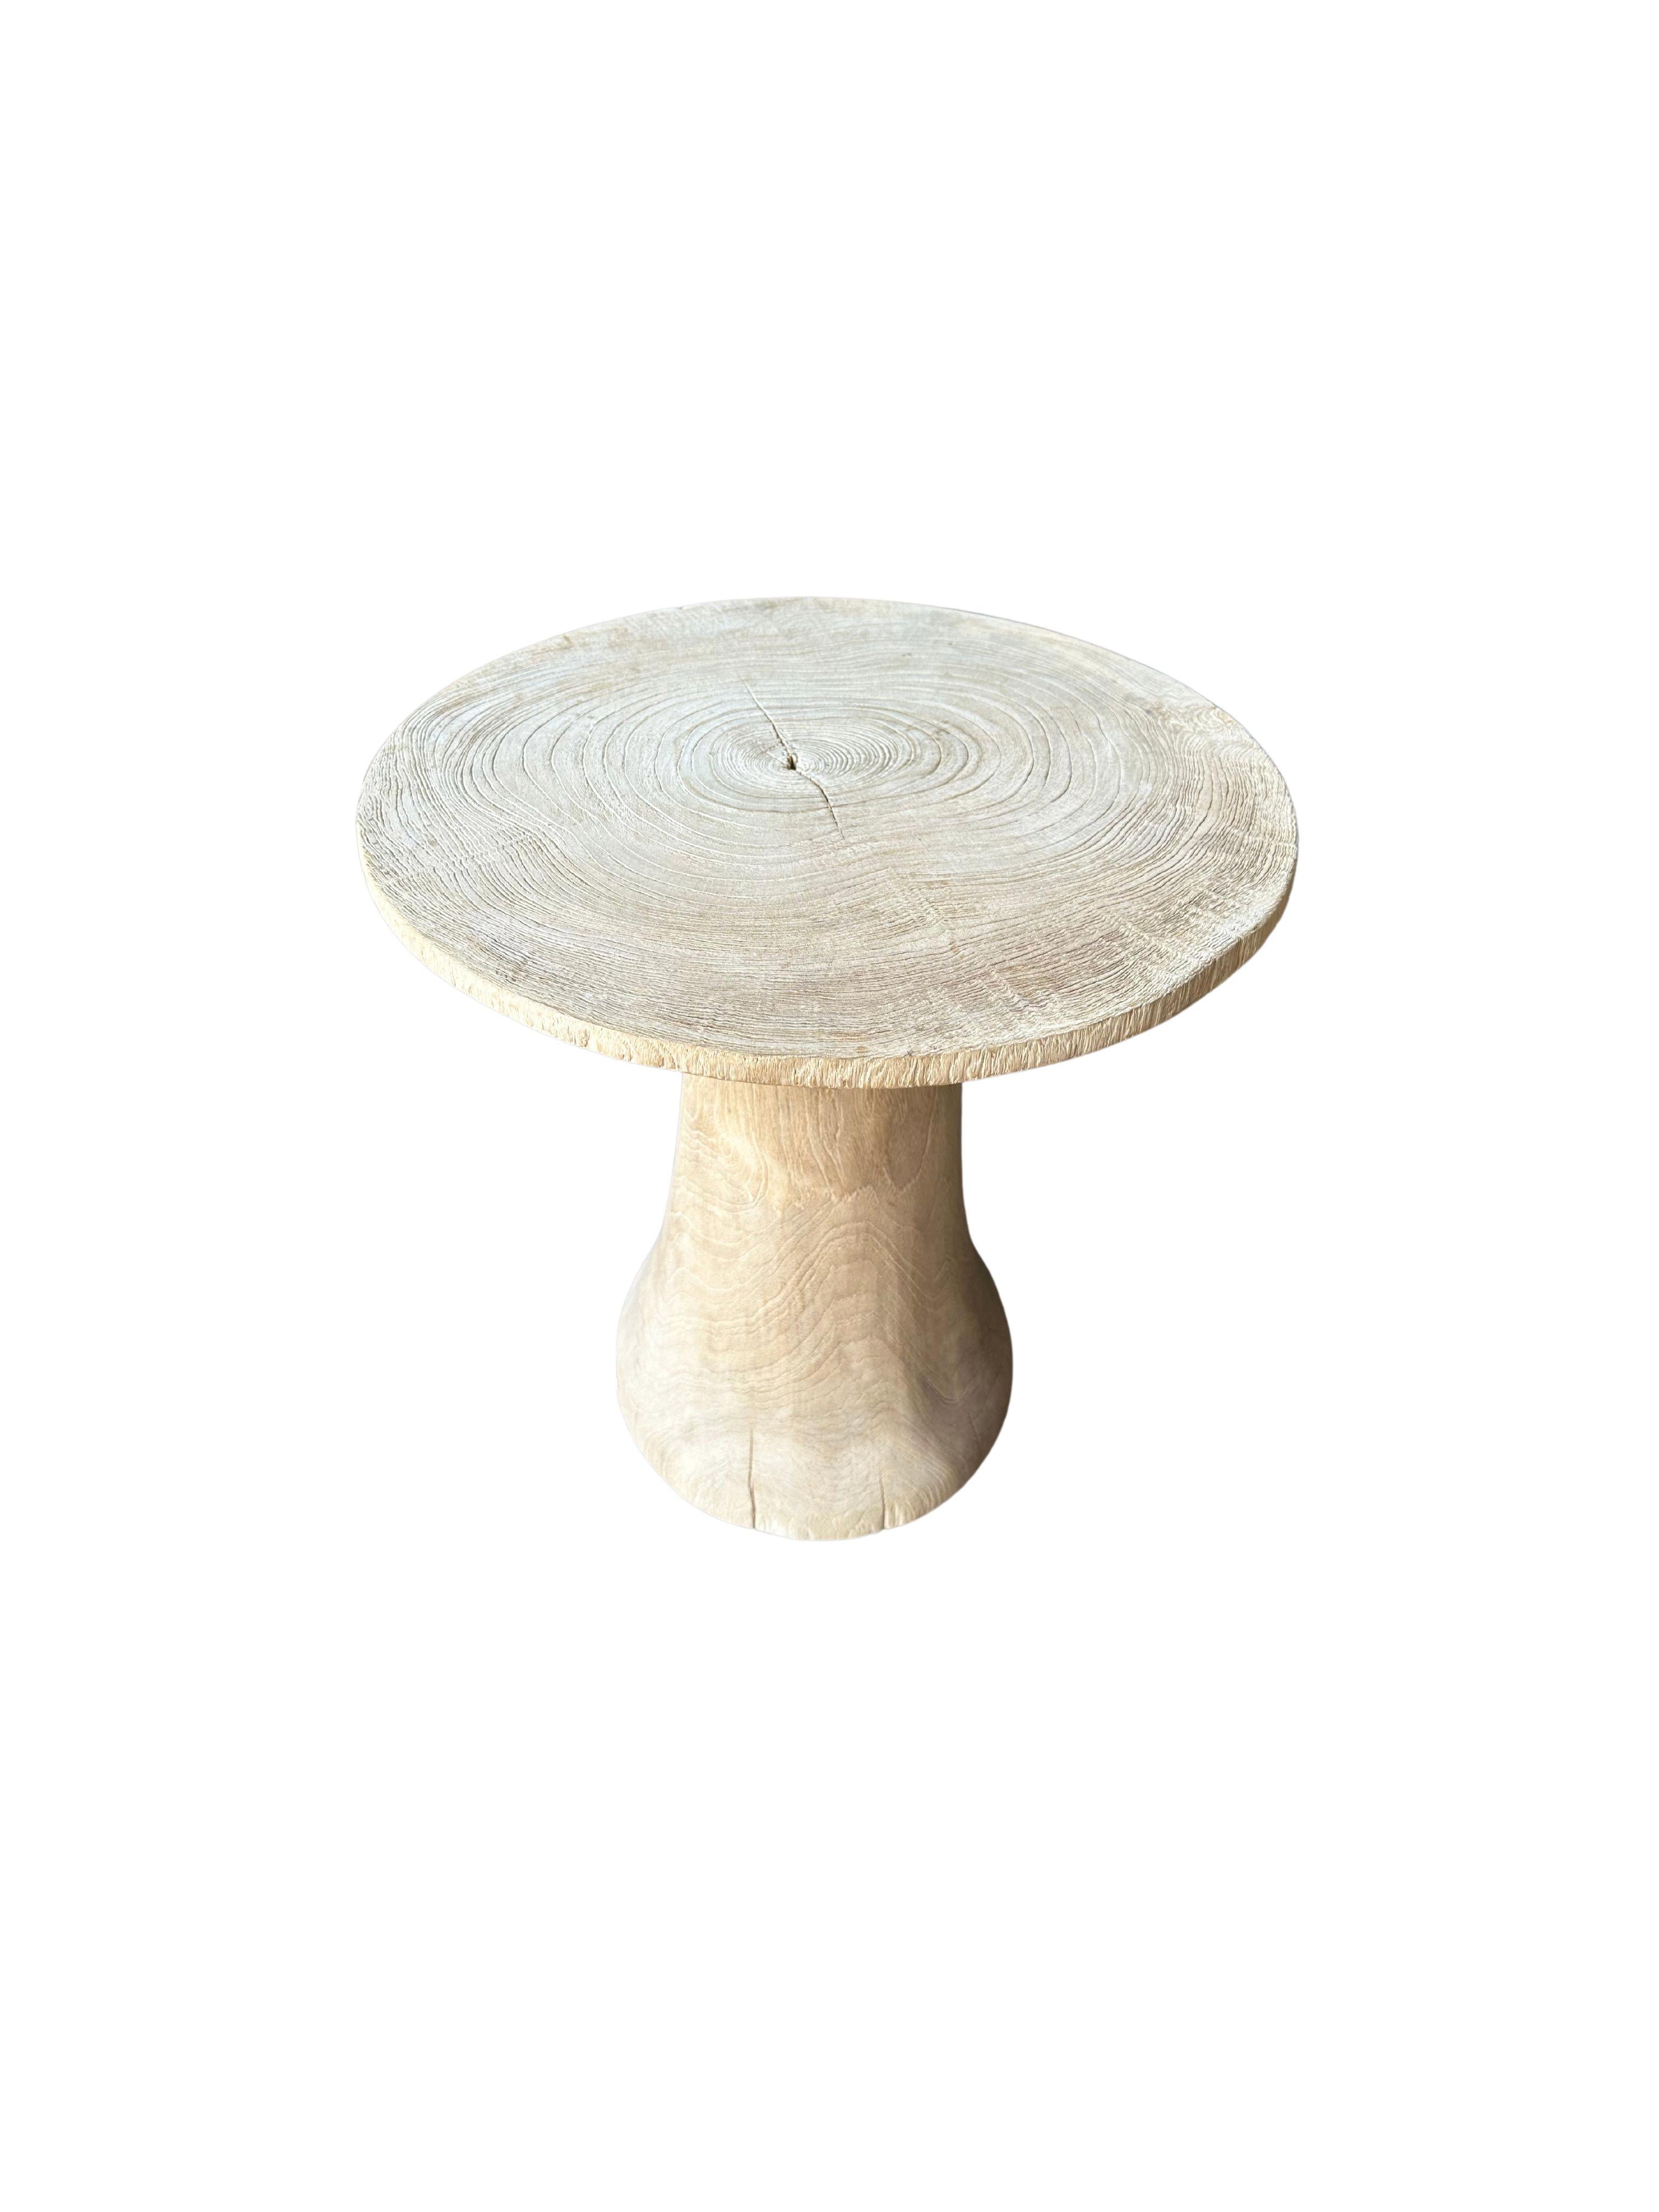 Hand-Crafted Round Side Table Crafted from Mango Wood & Bleached Finish